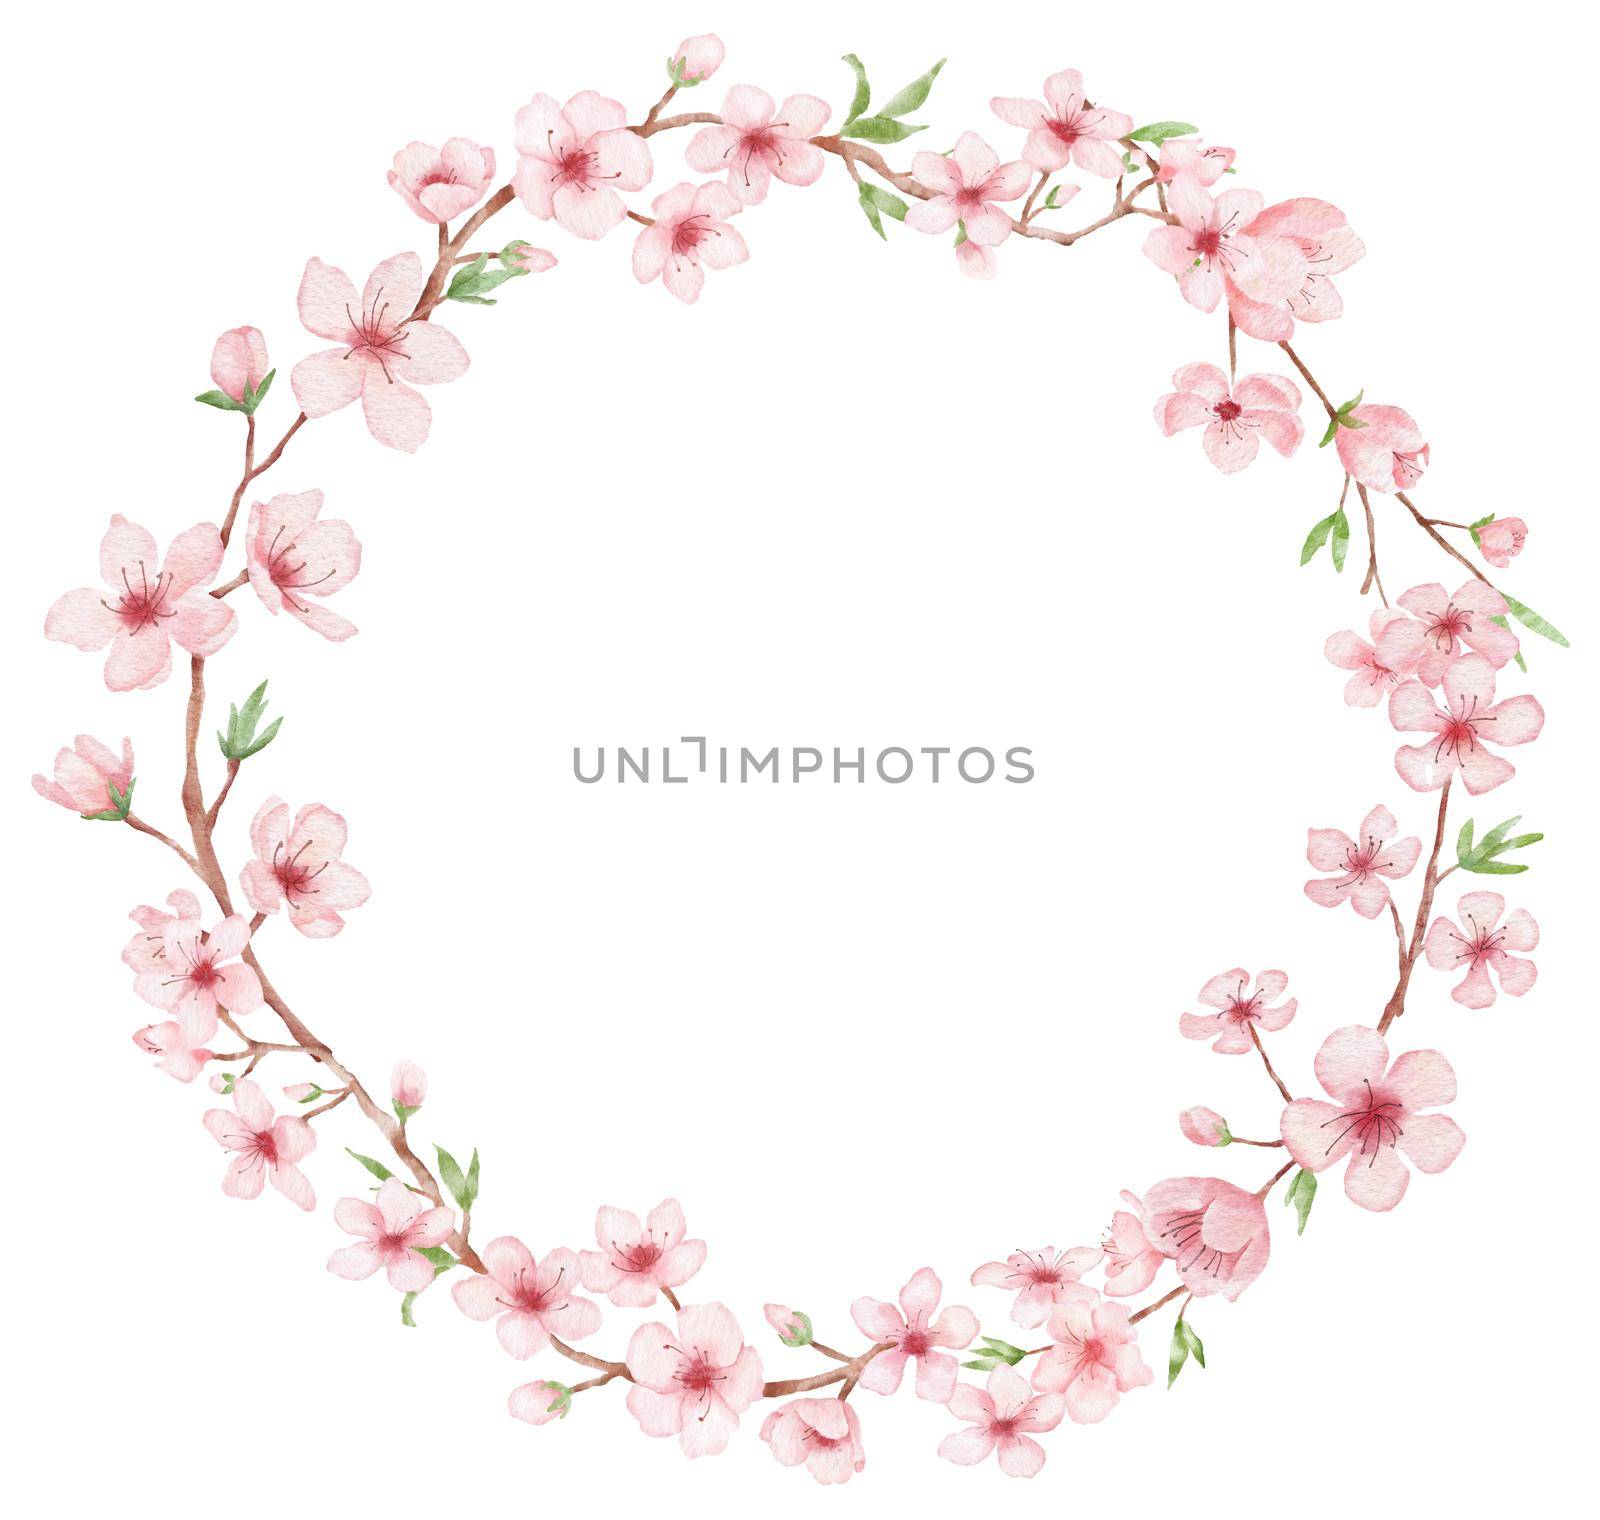 Round frame with Branch of Cherry blossom illustration. Watercolor painting sakura wreath isolated on white. Japanese flower